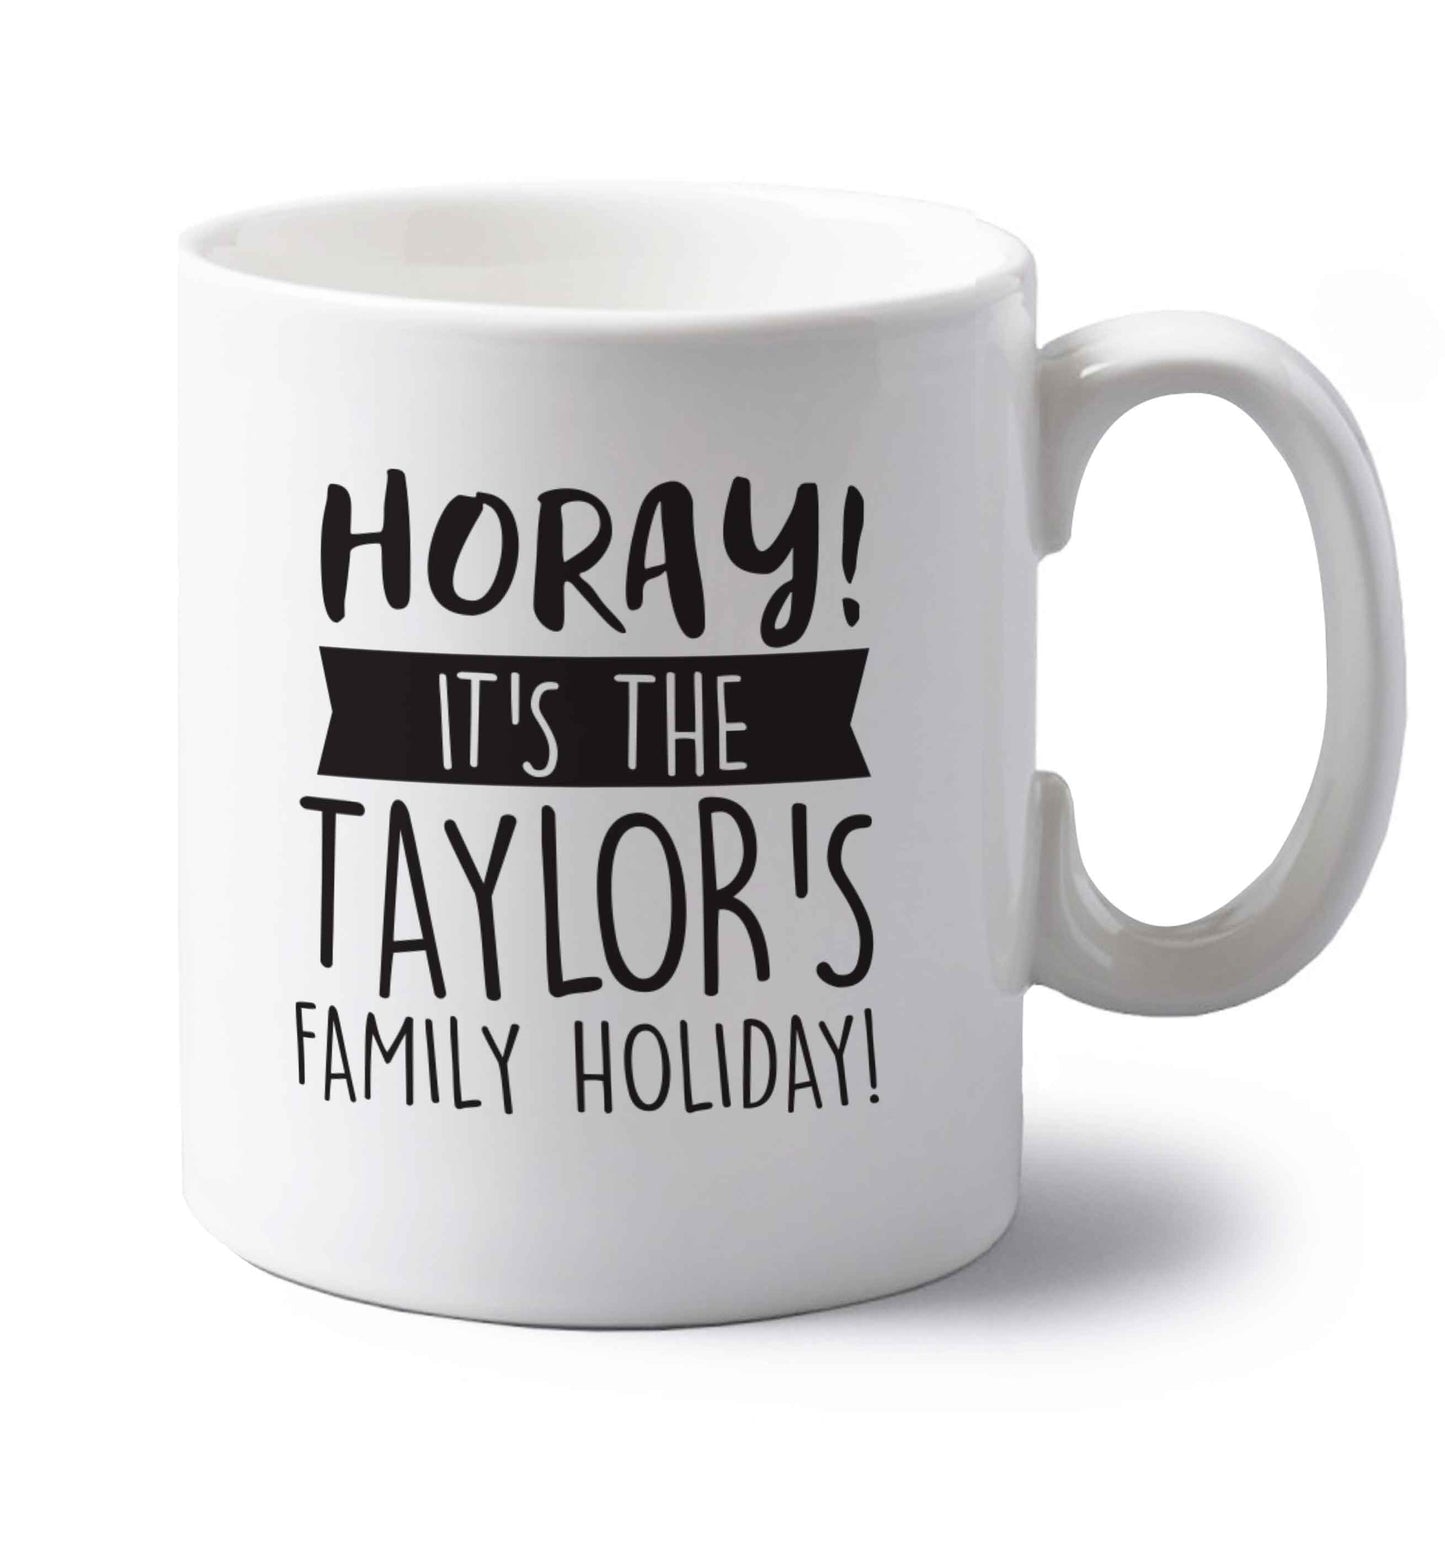 Horay it's the Taylor's family holiday! personalised item left handed white ceramic mug 